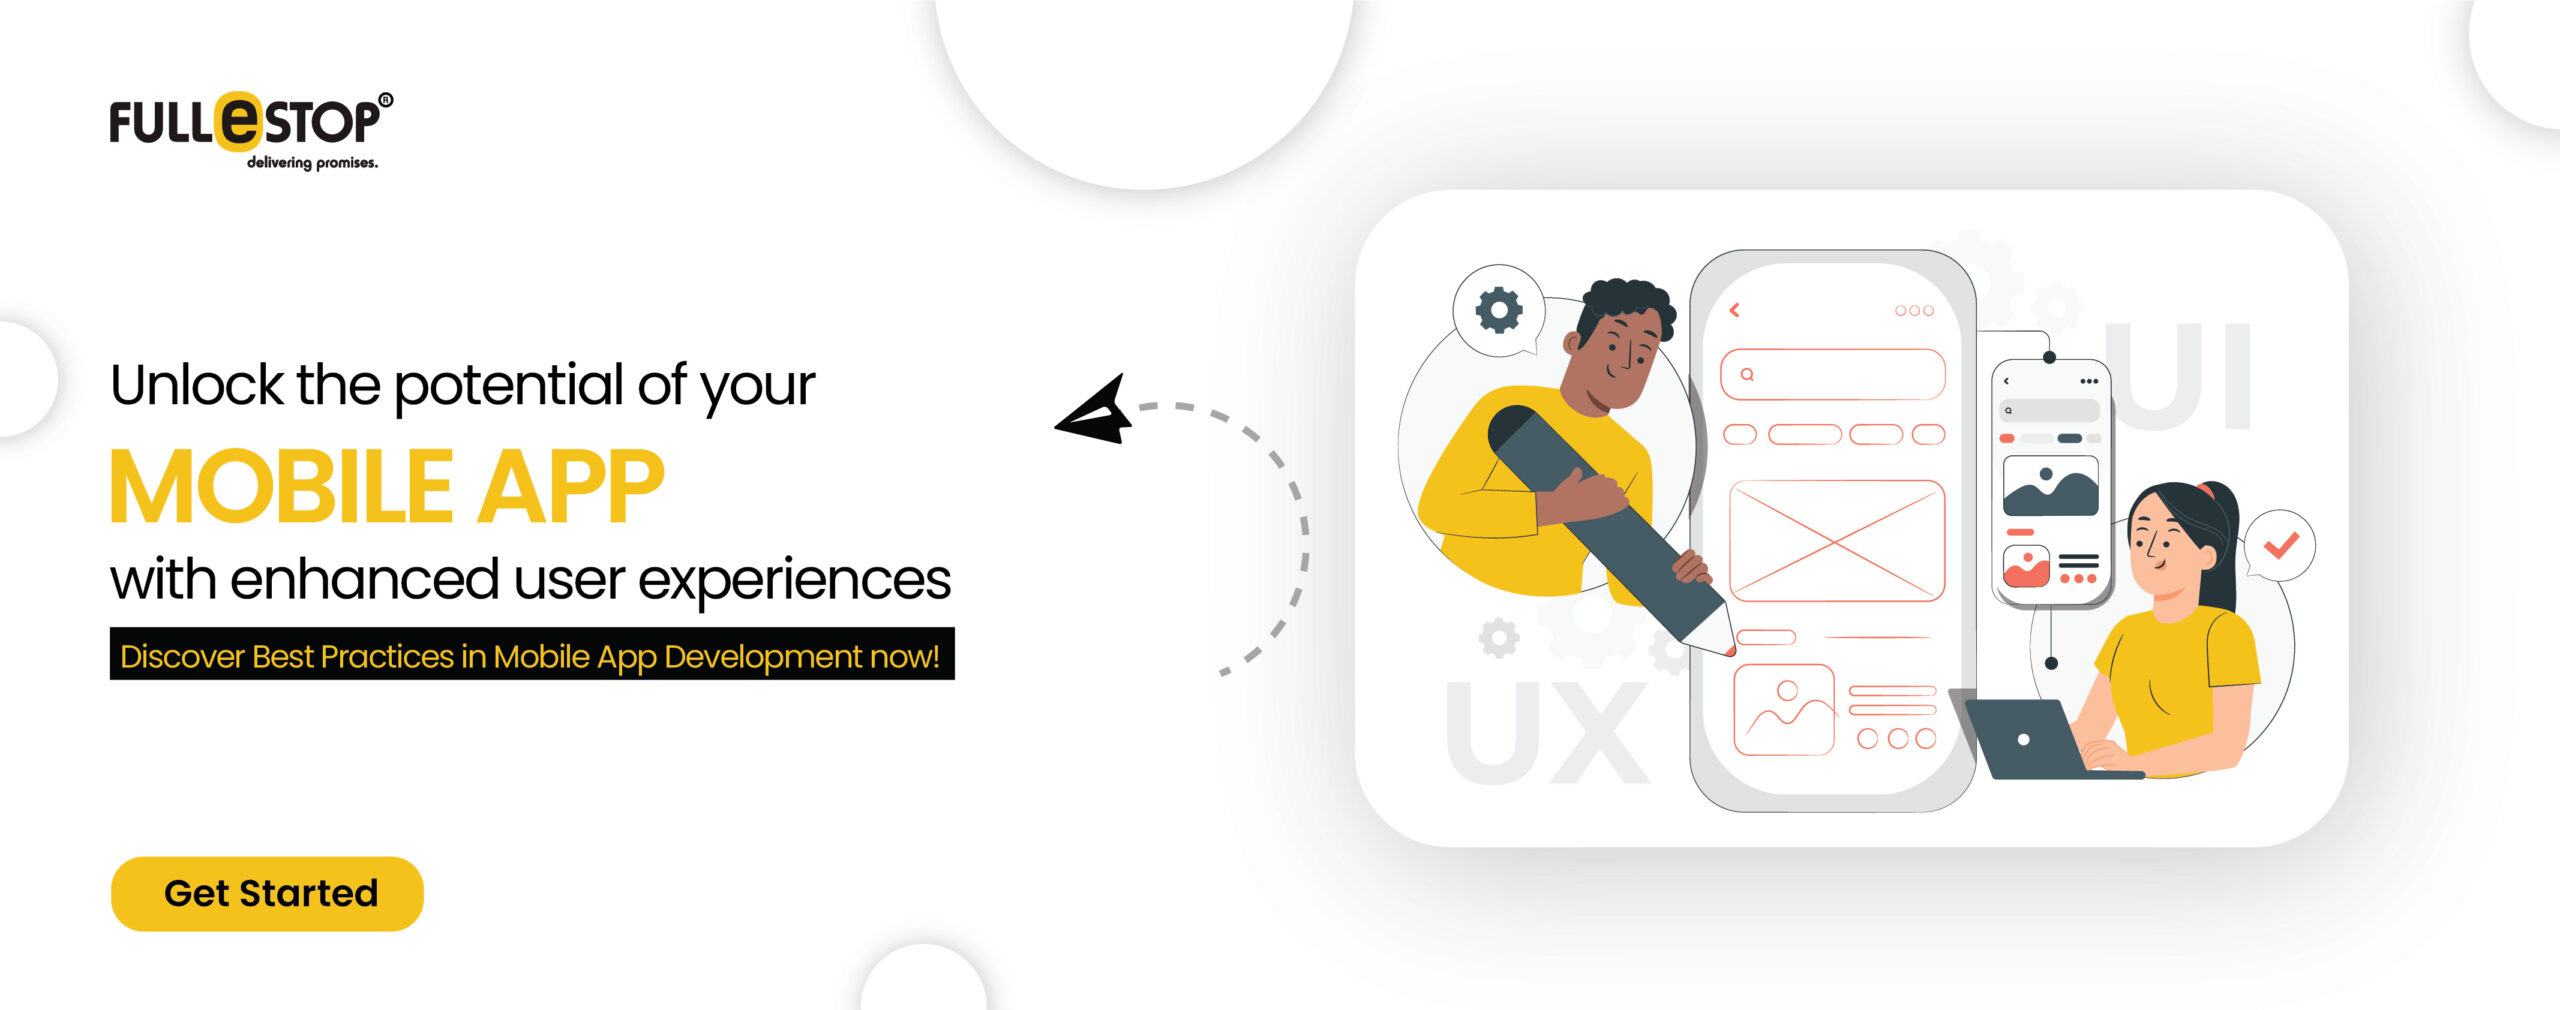 How to Improve the User Experience on Your Mobile App-CTA Button